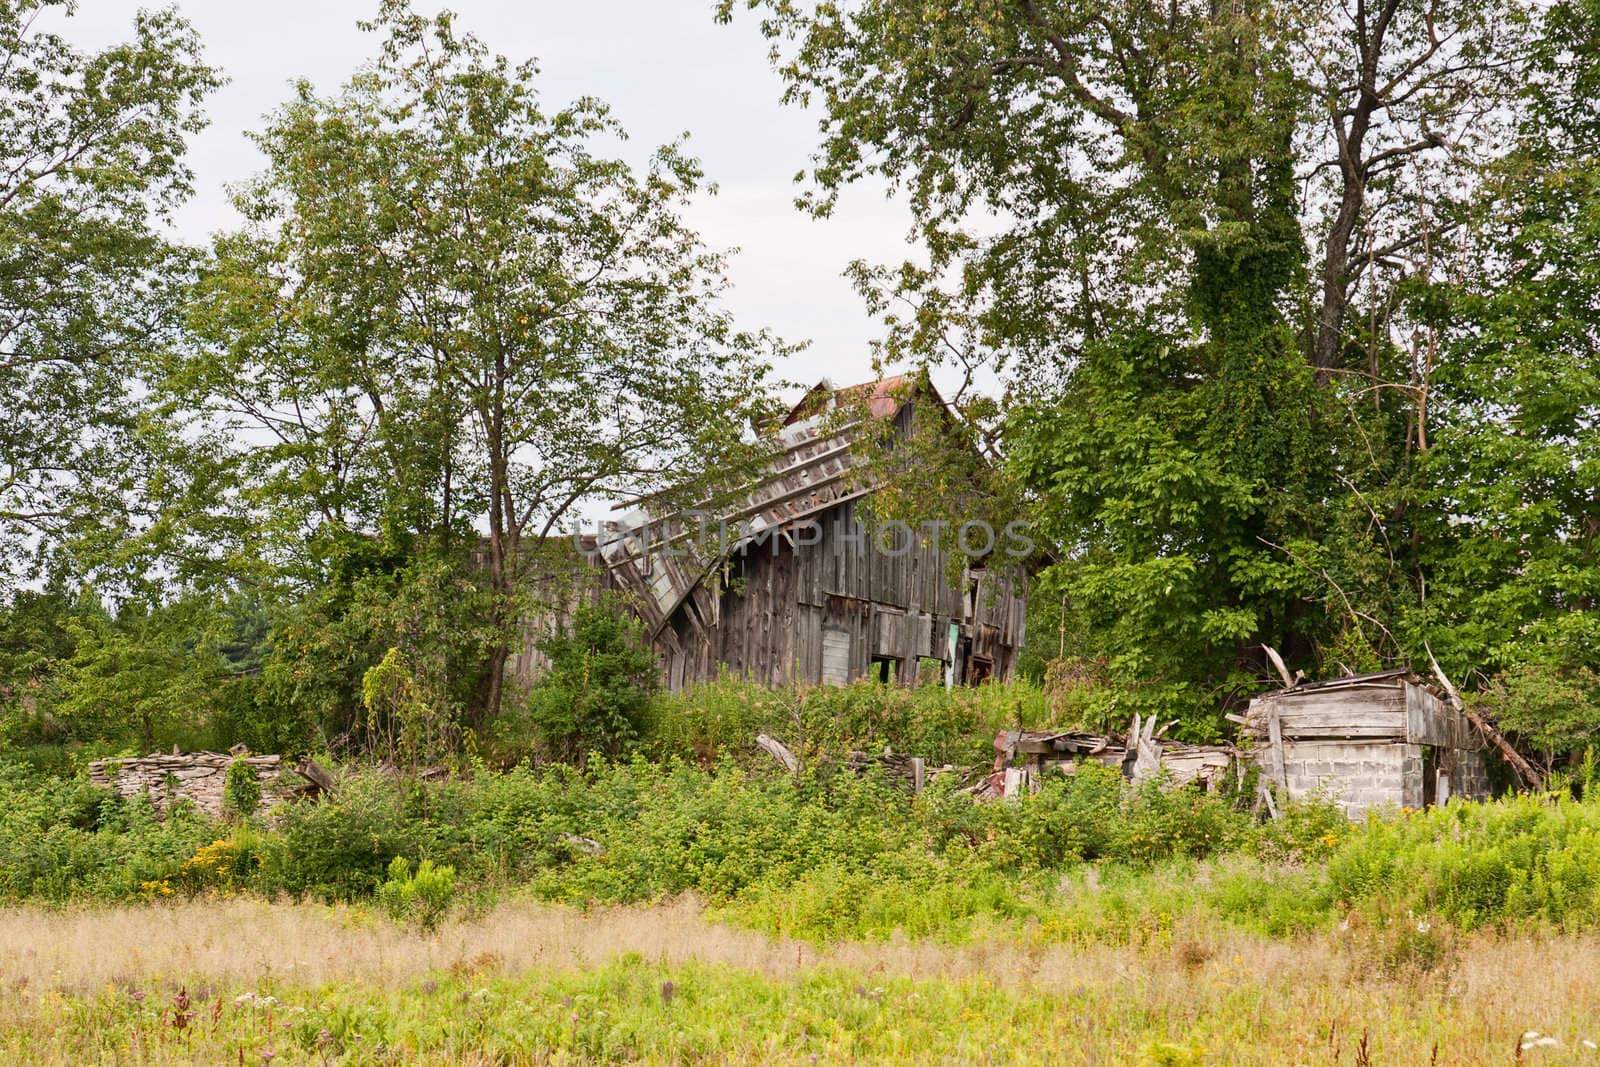 An old, ruined wooden barn surrounded by trees and weeds